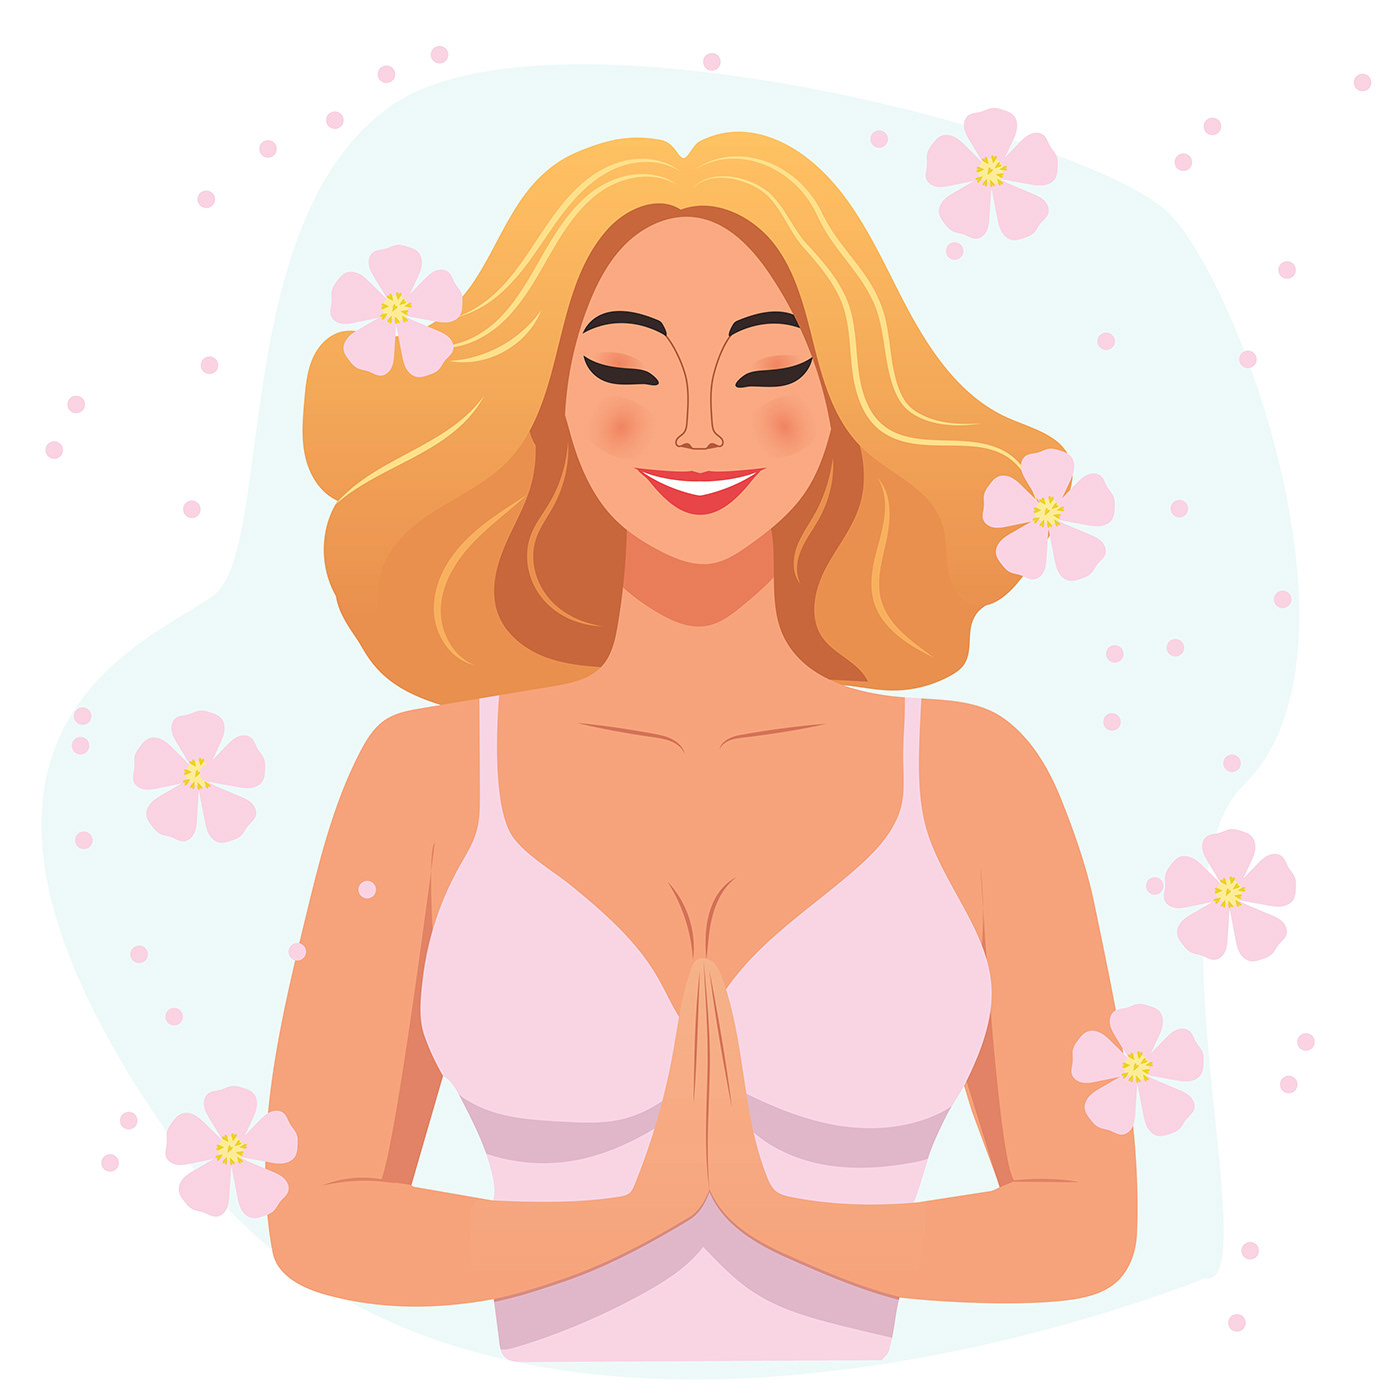 A happy woman with blonde hair meditating
